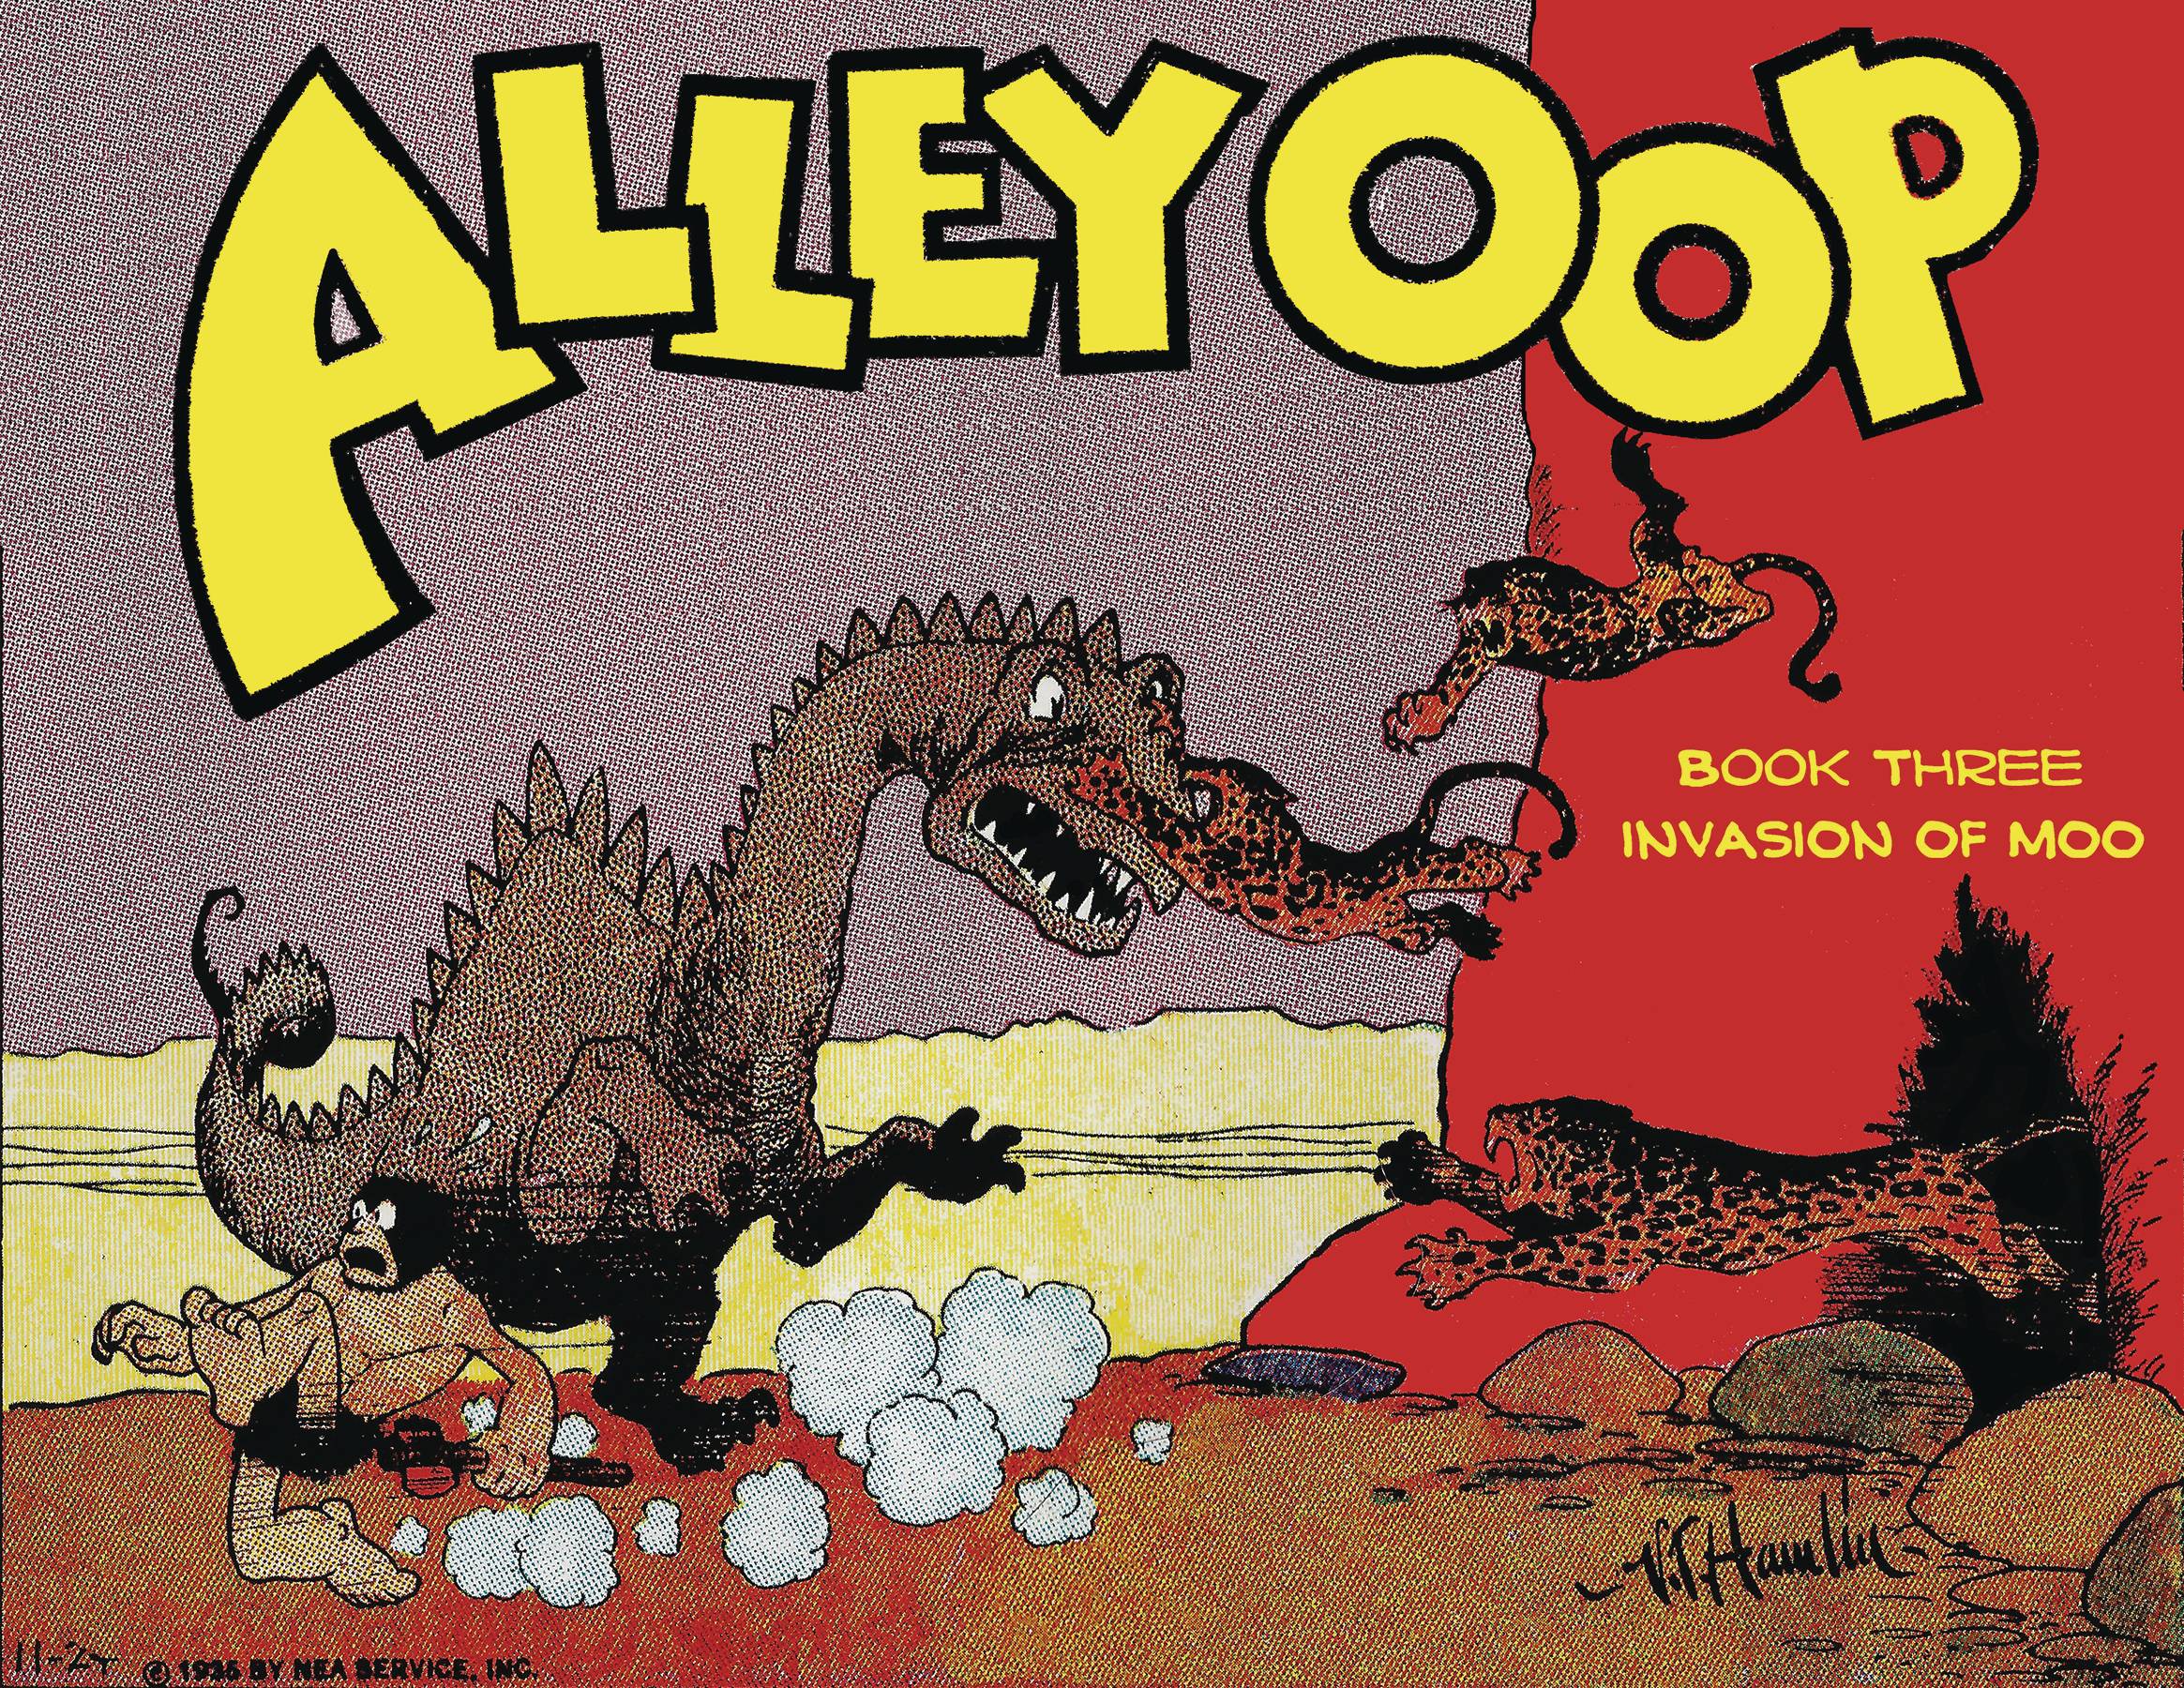 ALLEY OOP AND INVASION OF MOO VOL 03